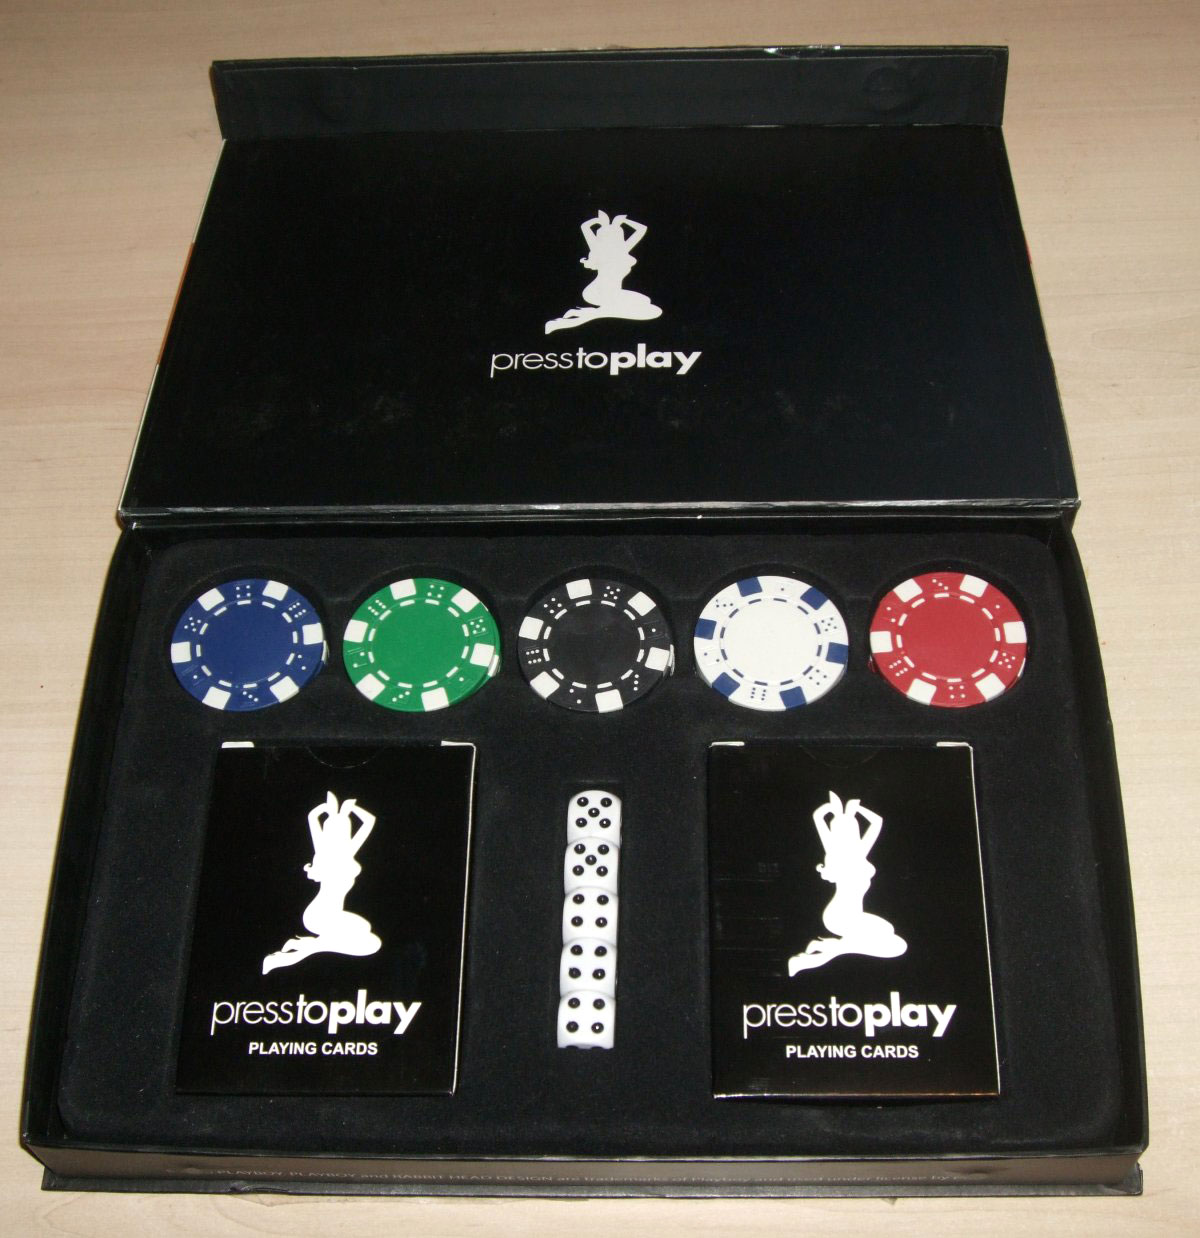 Playboy “Press to Play” playing cards, 2010